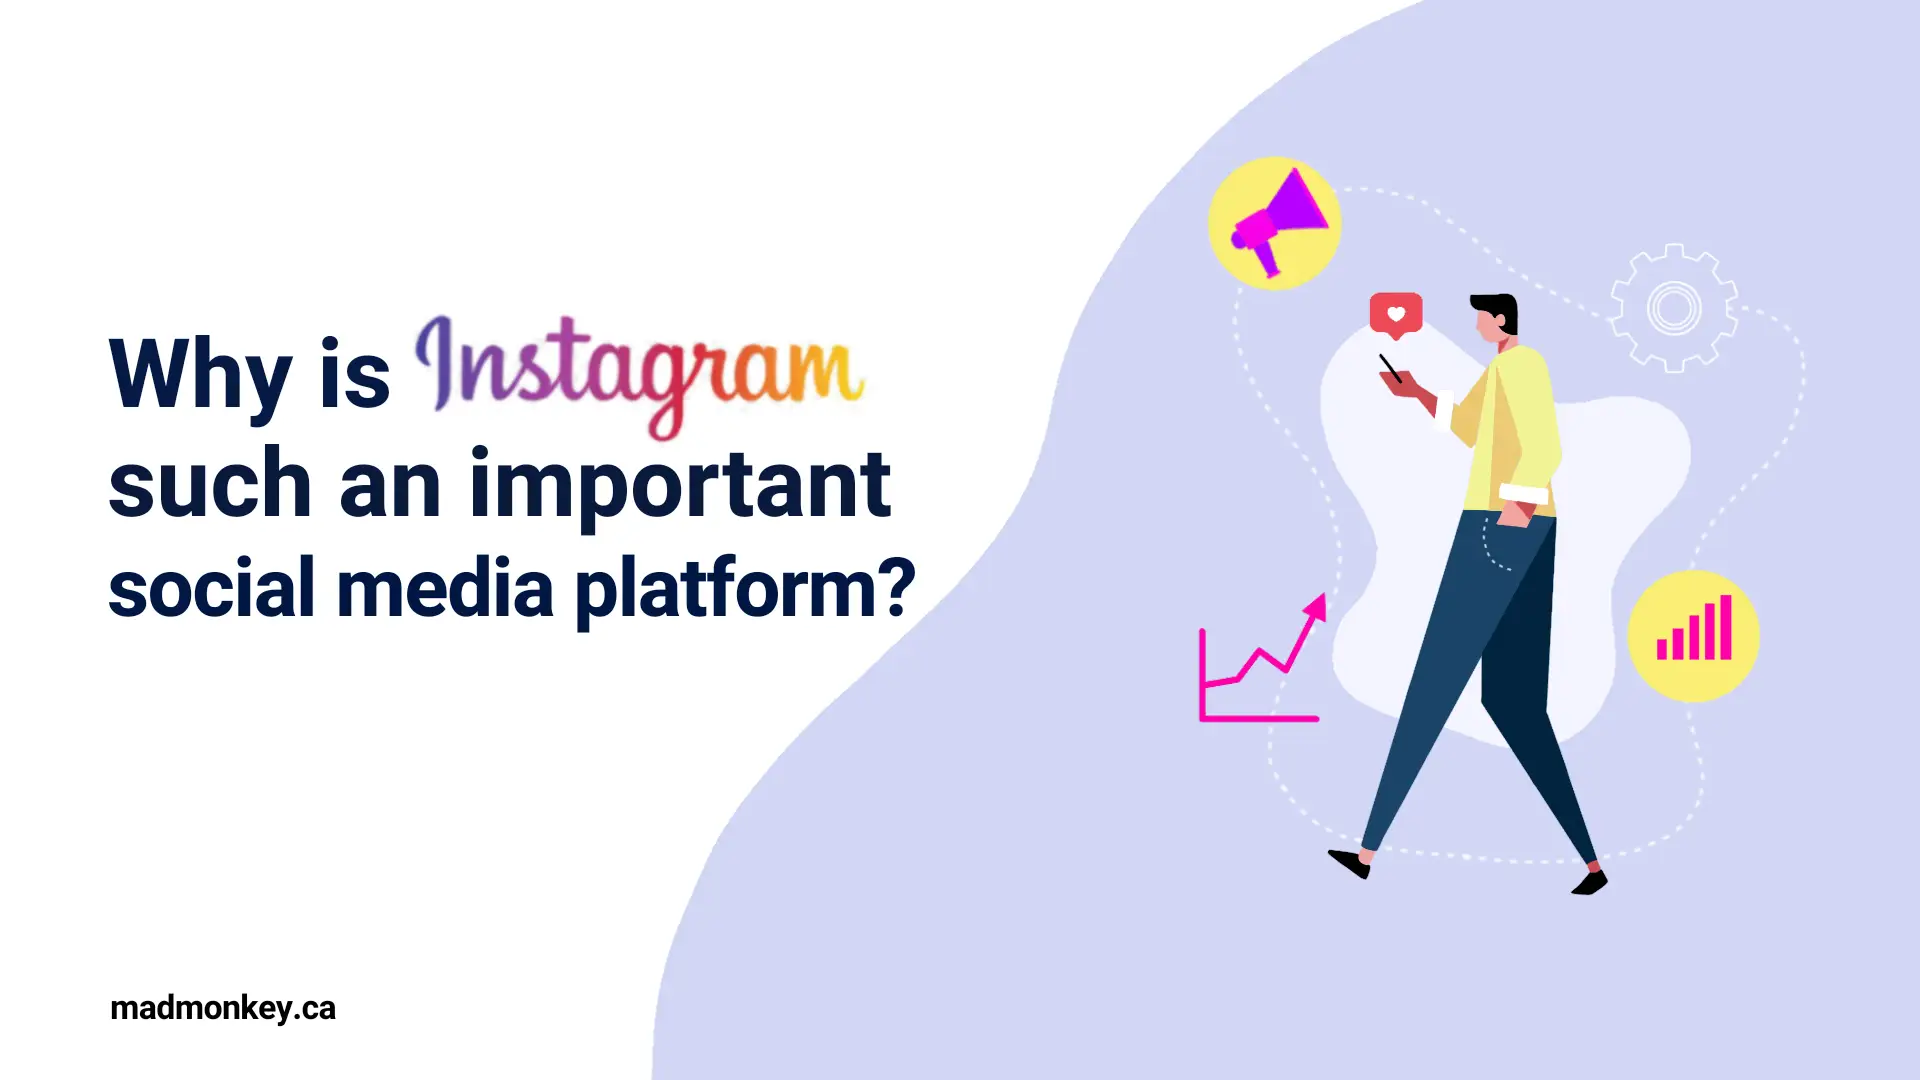 Why Is Instagram Such An Important Social Media Platform For Marketing?